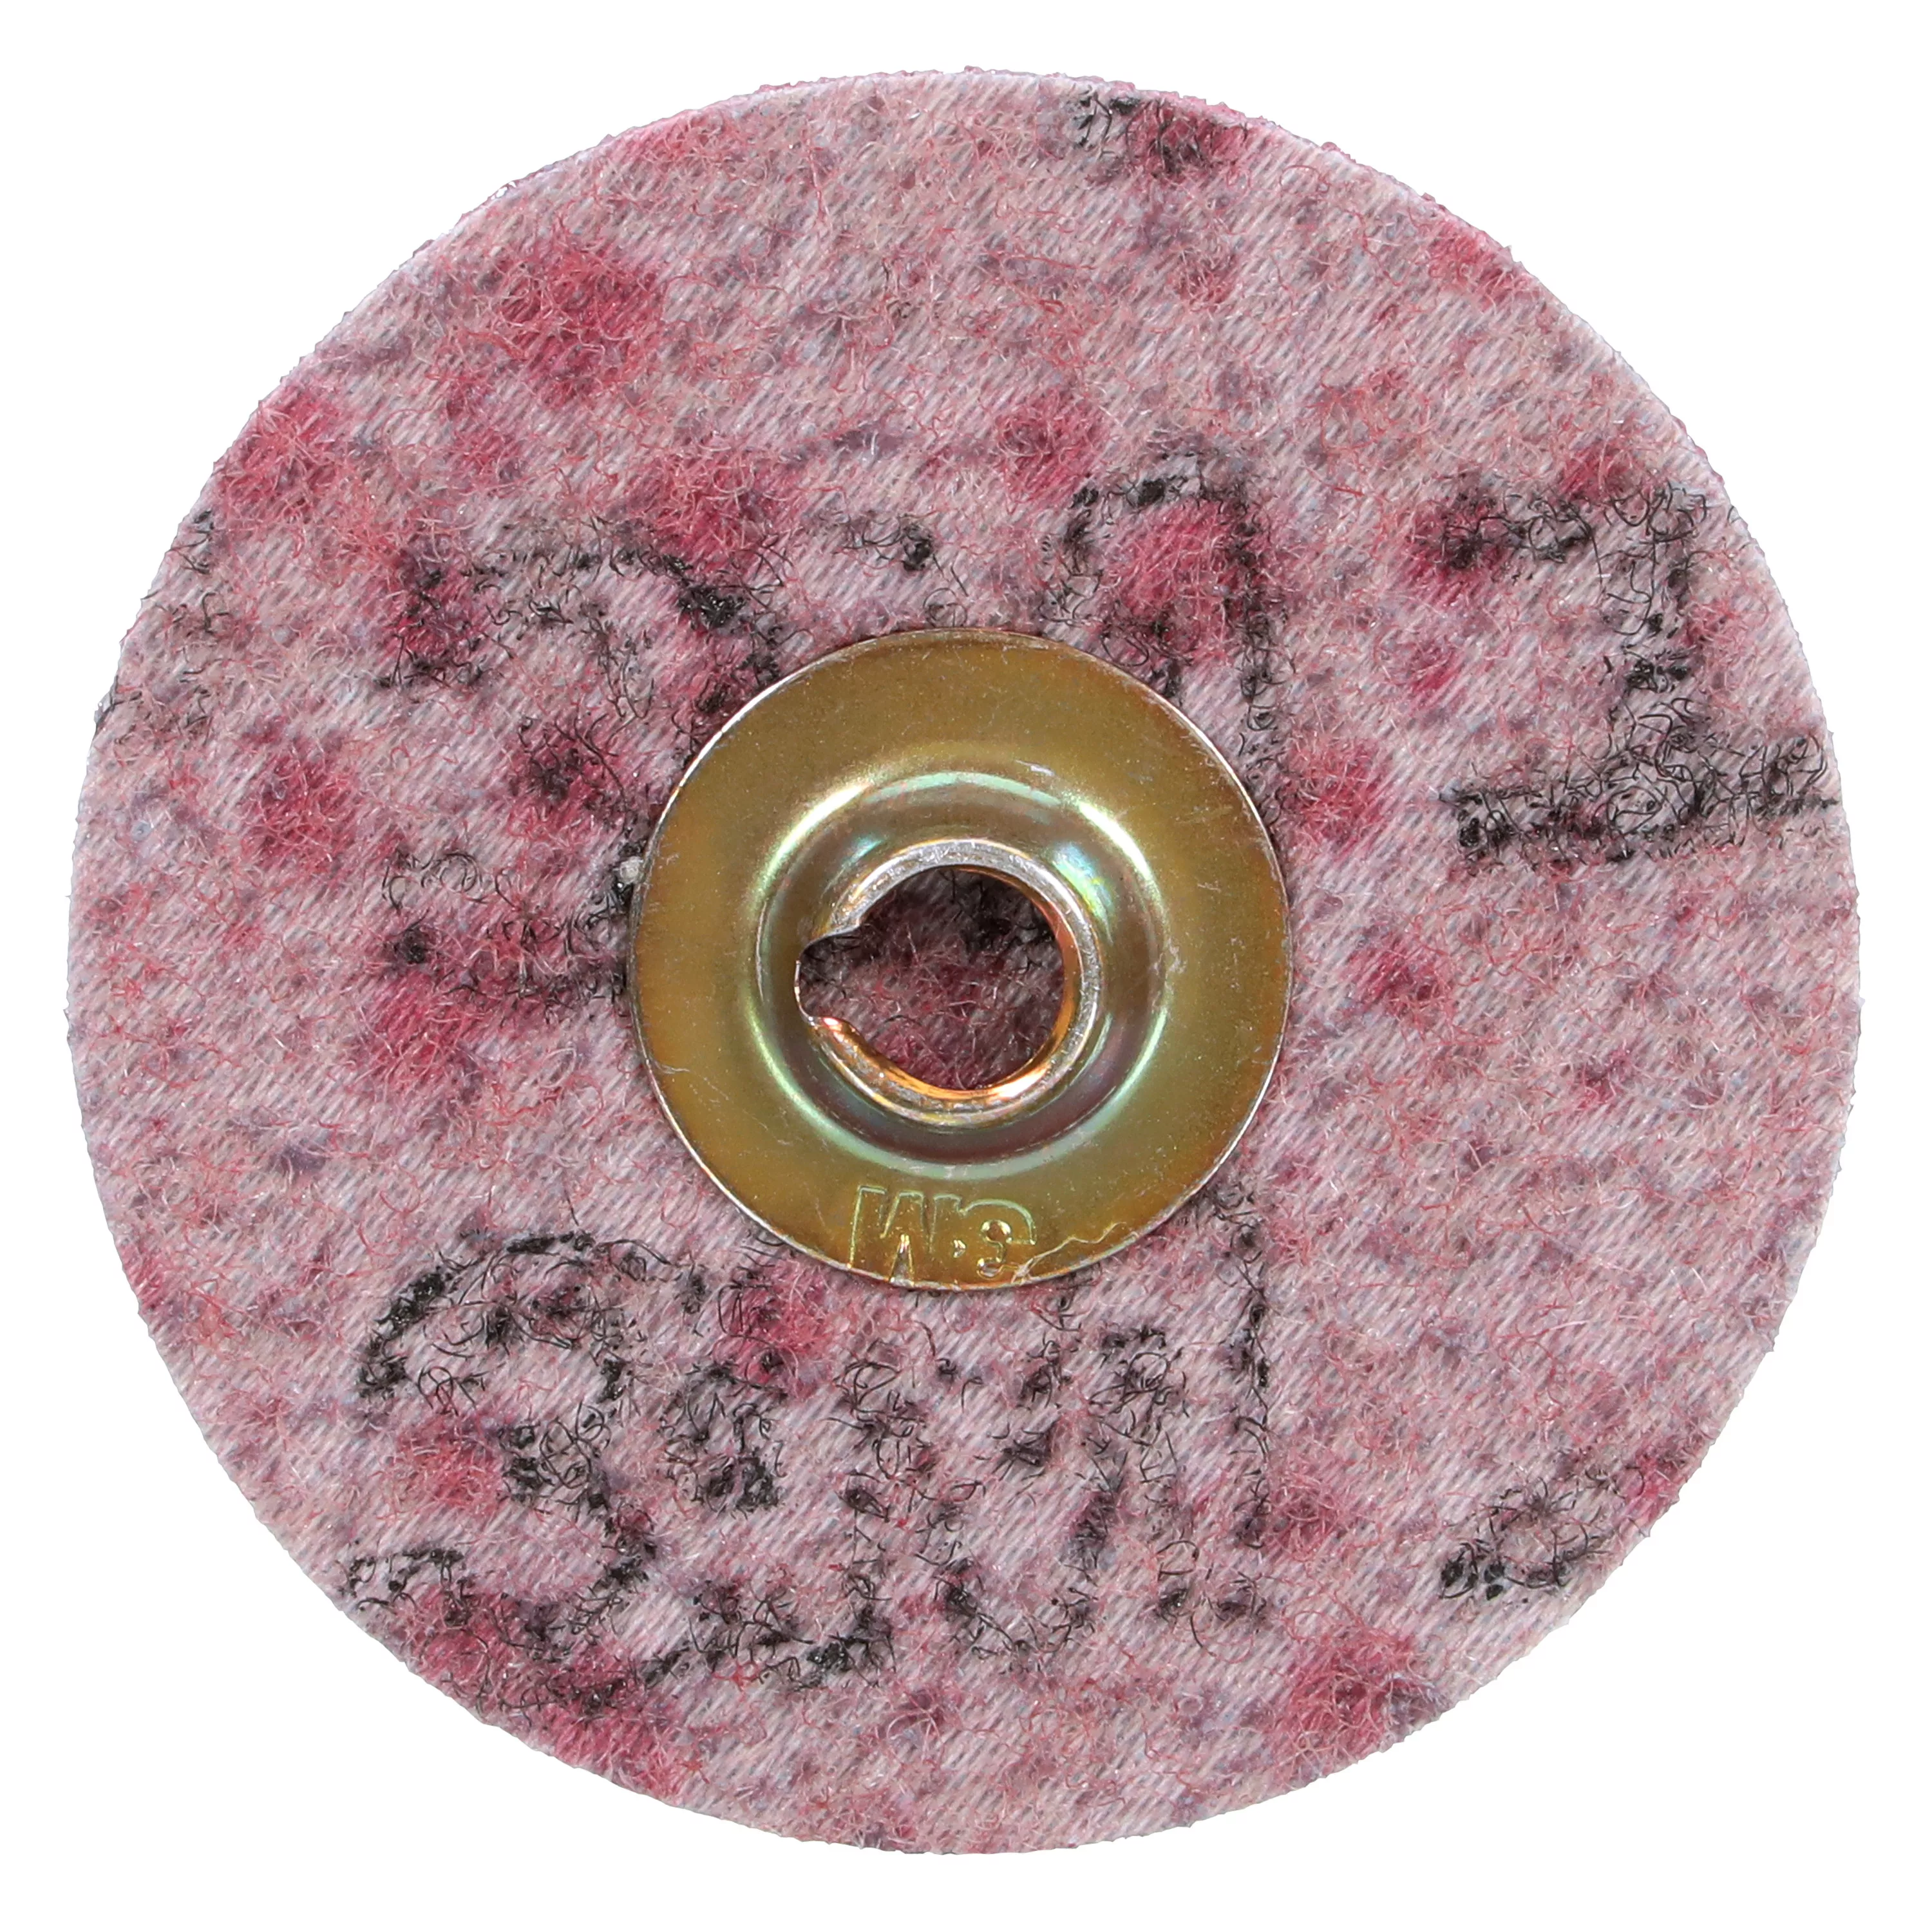 Product Number GB-DM | Scotch-Brite™ Roloc™ Light Grinding and Blending Disc